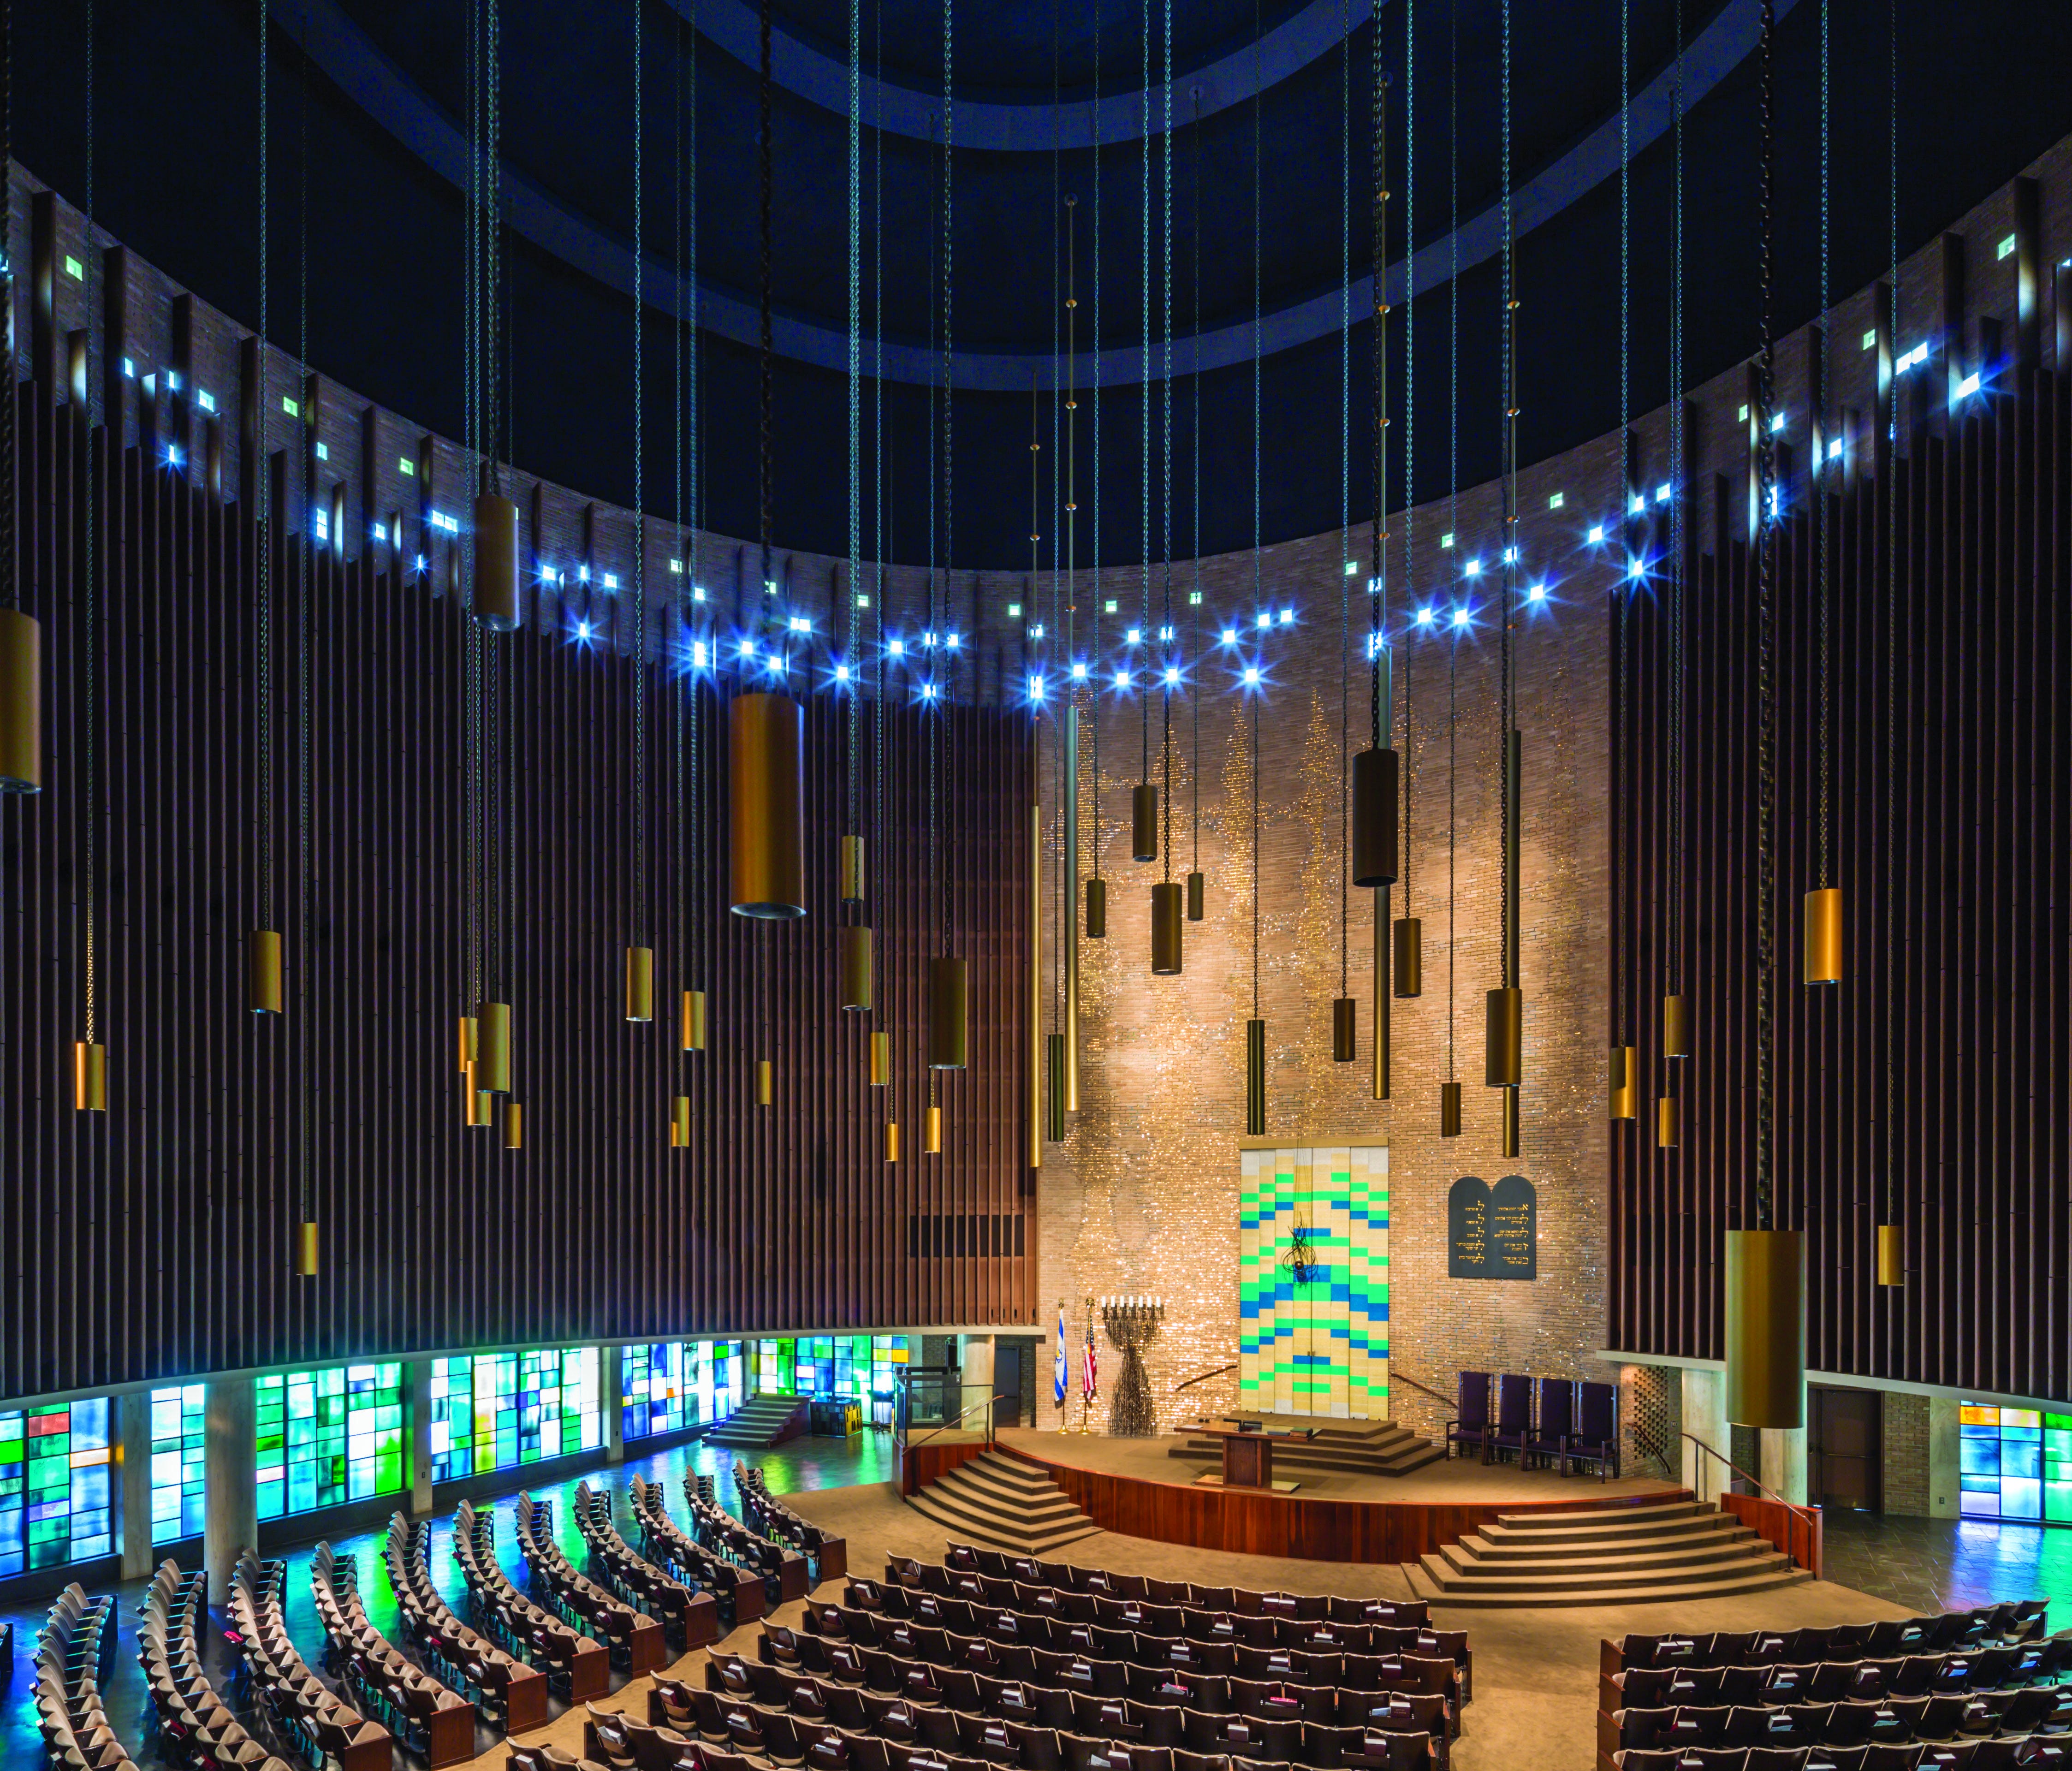 Temple Emanu-El, Dallas (Howard Meyer and Max Sandfield): Following its completion in 1957, Temple Emanu-El was widely hailed as a brilliant alliance of architecture and art. The temple, a cylindrical sanctuary with lofty walls and a shallow-domed ce